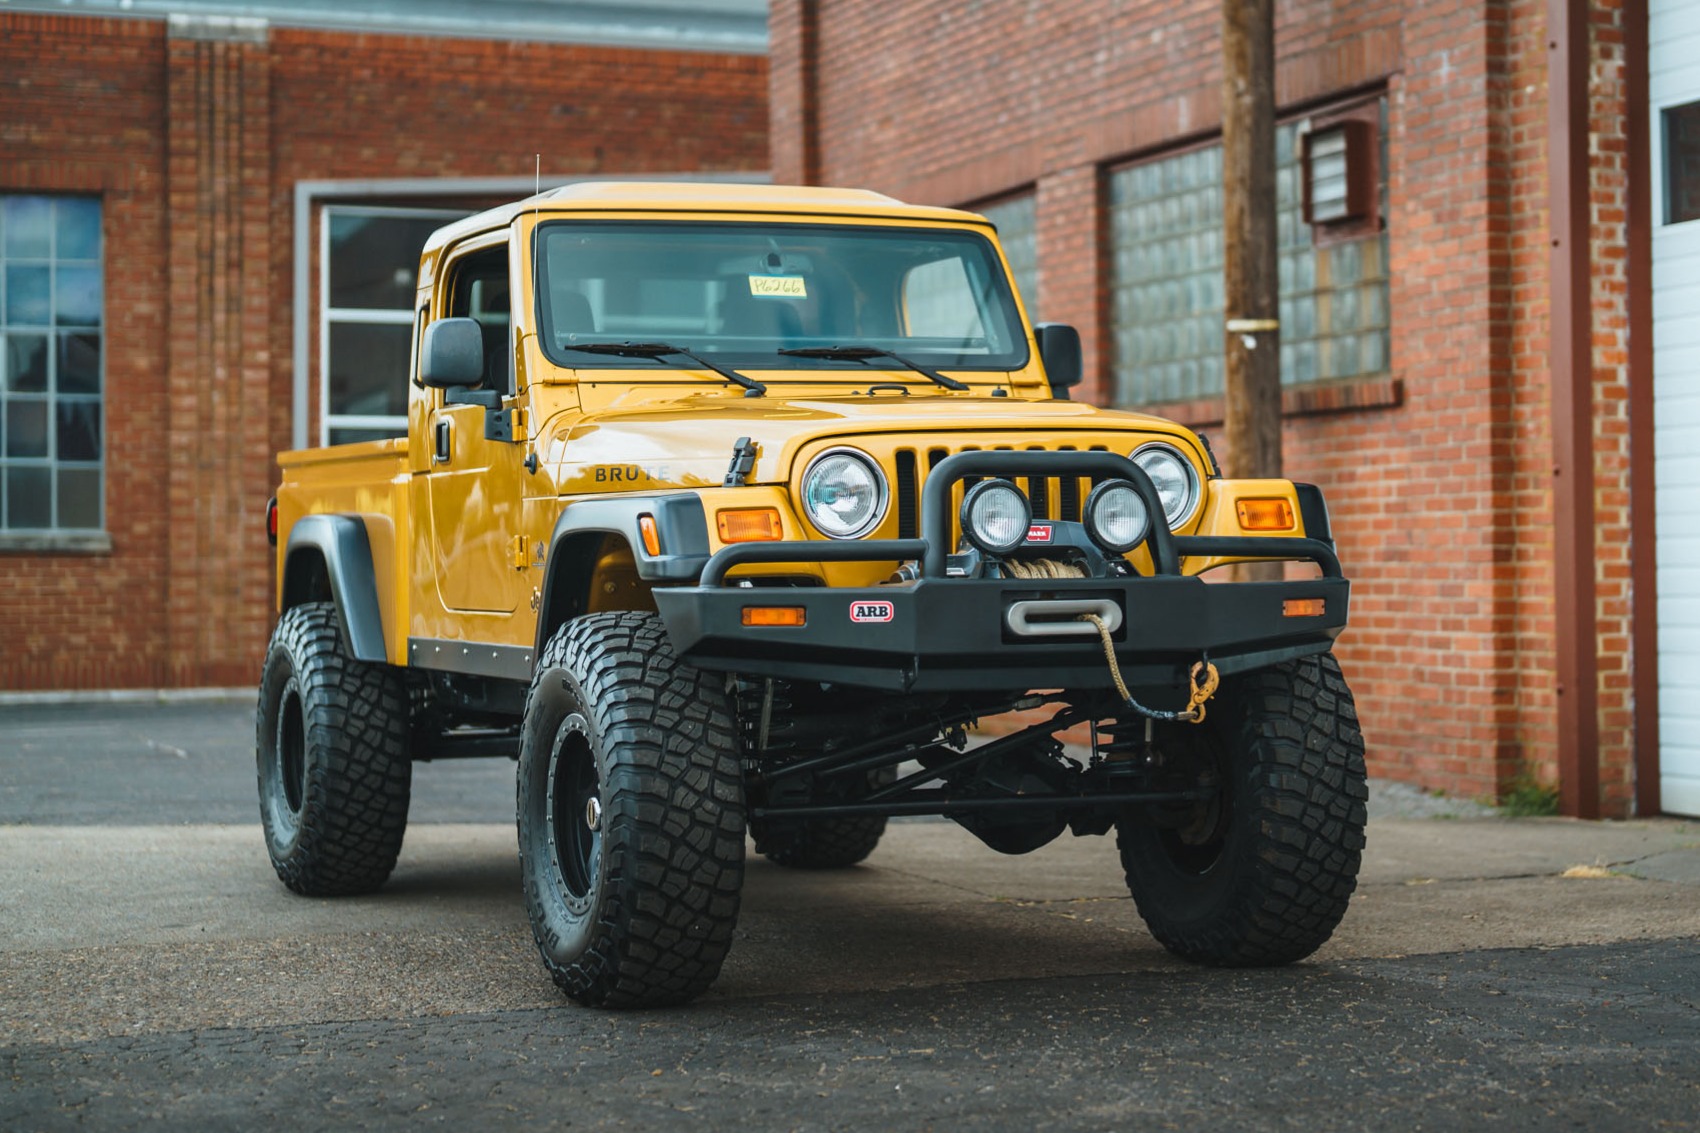 Used 2003 Jeep Wrangler Rubicon AEV Brute Pickup Conversion 5-Speed Review